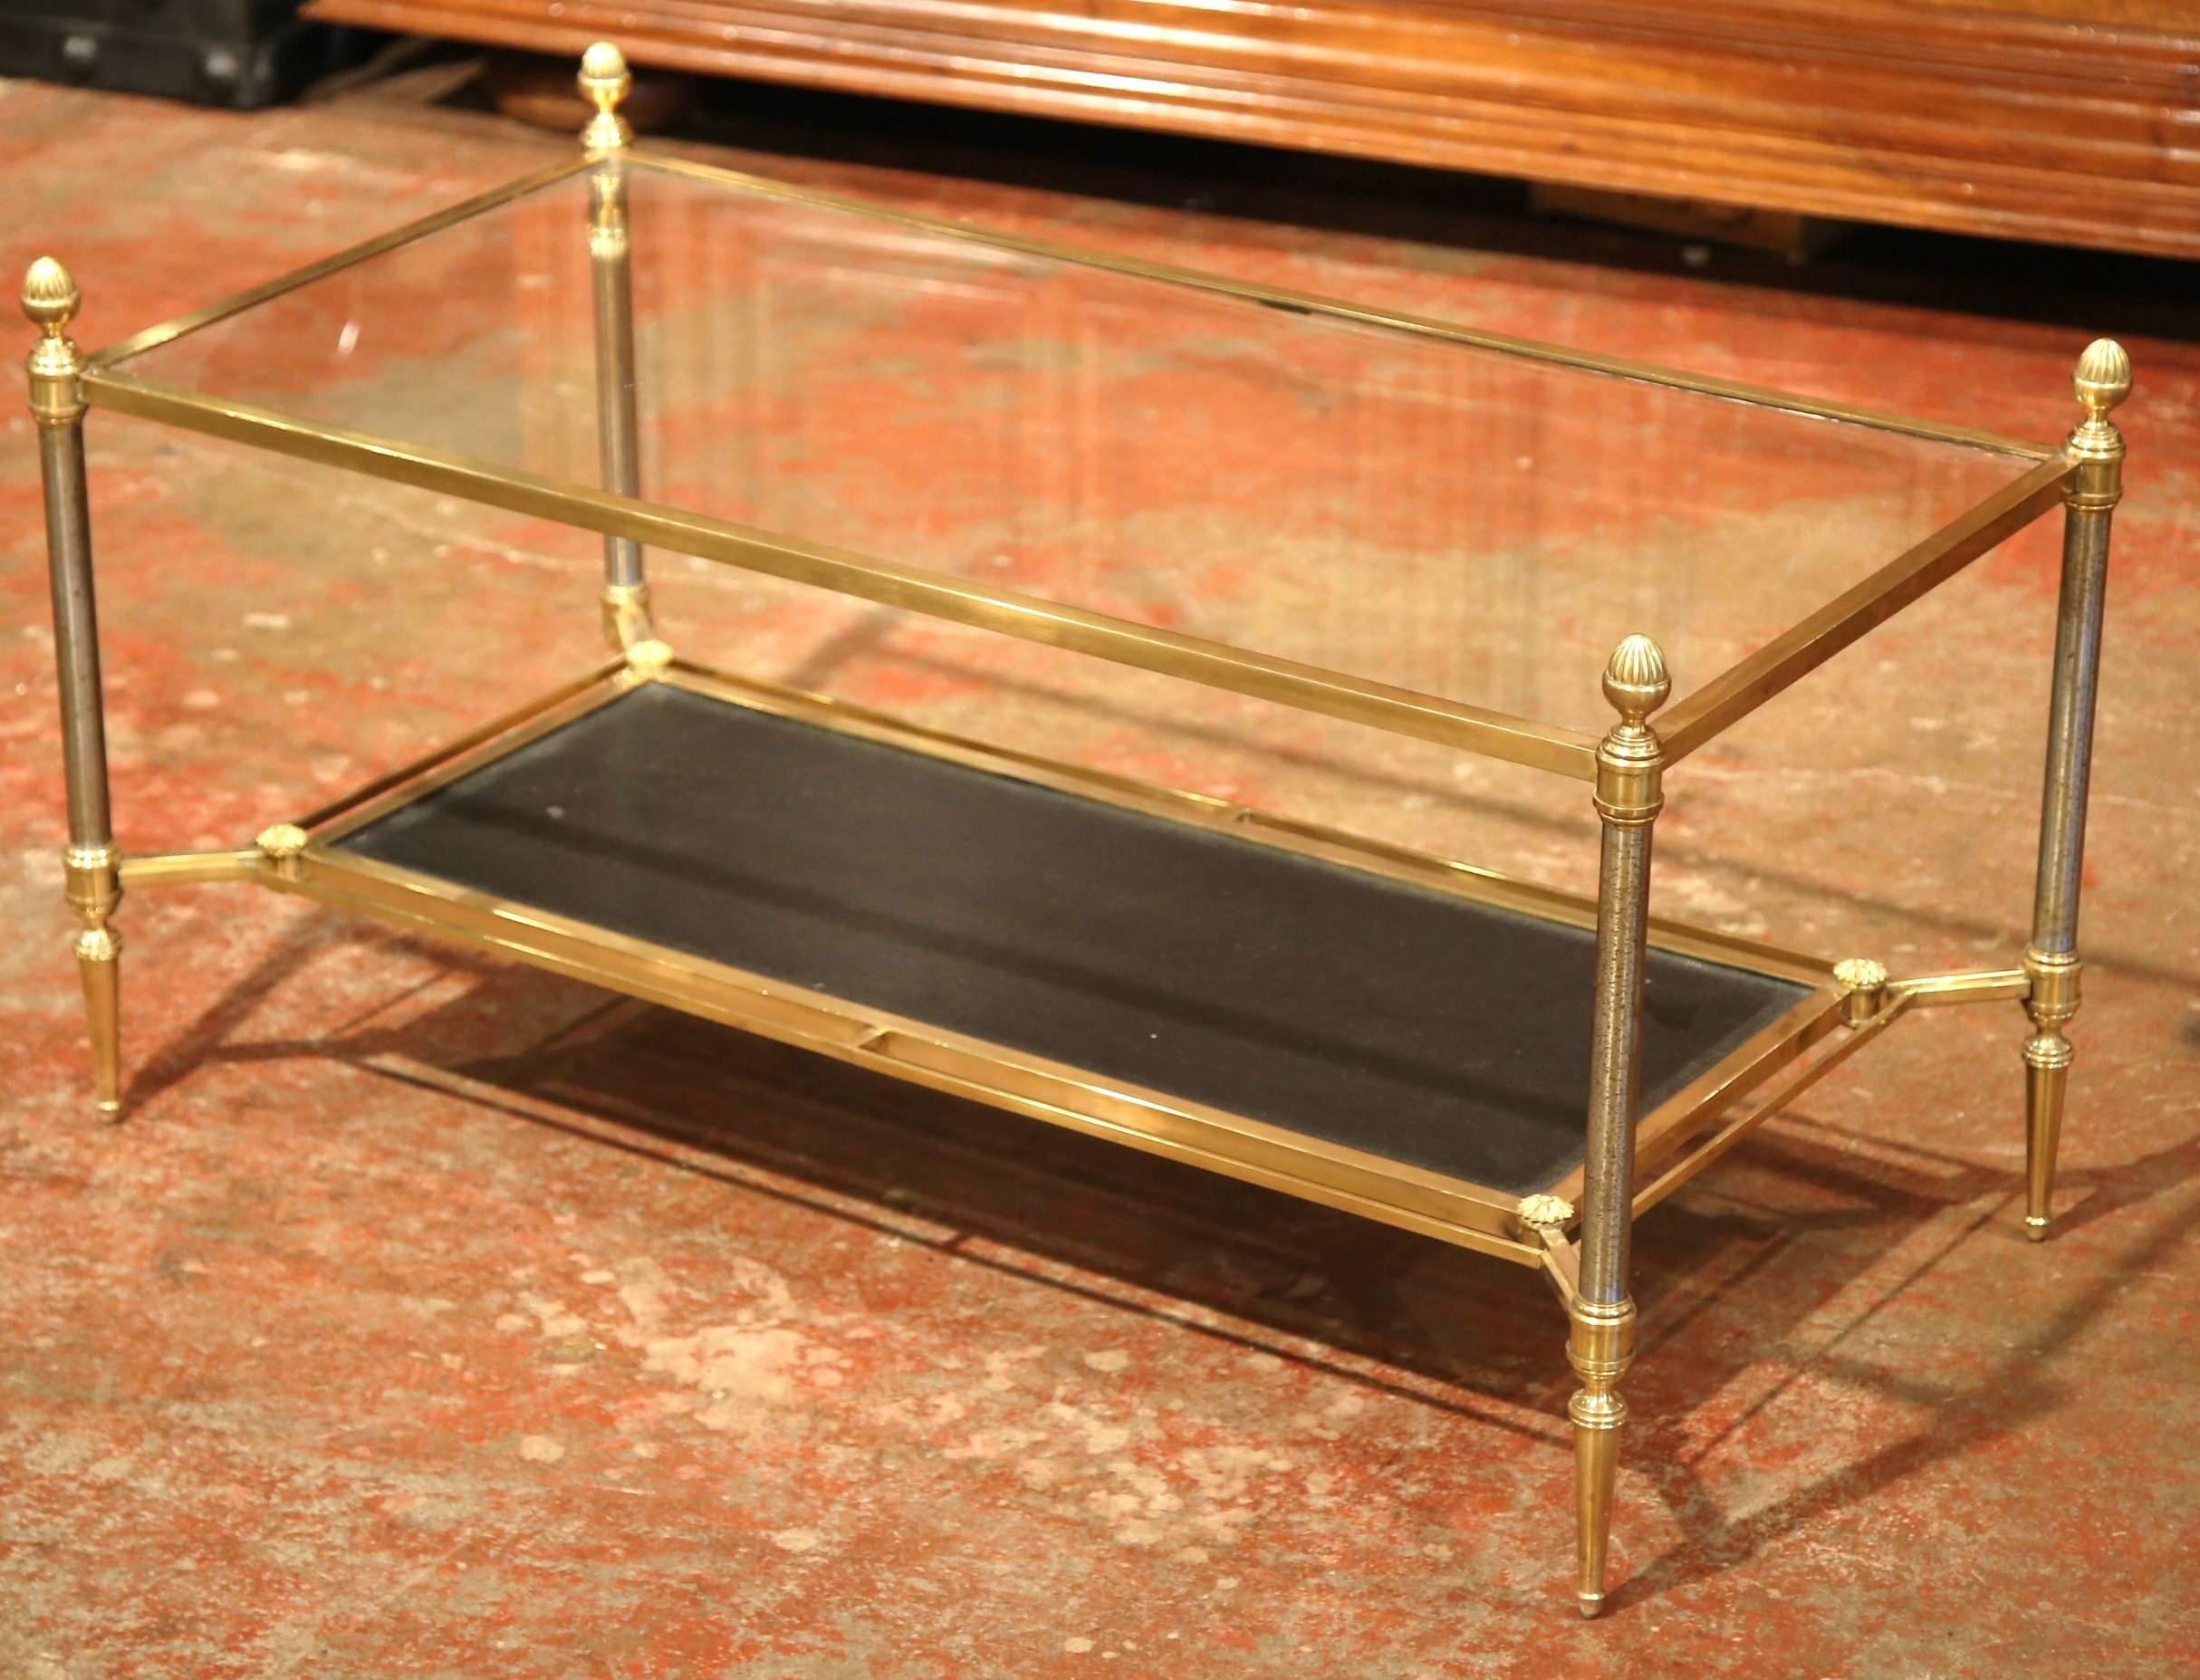 Hand-Crafted Mid-20th Century French Brass Steel and Leather Coffee Table from Maison Jansen